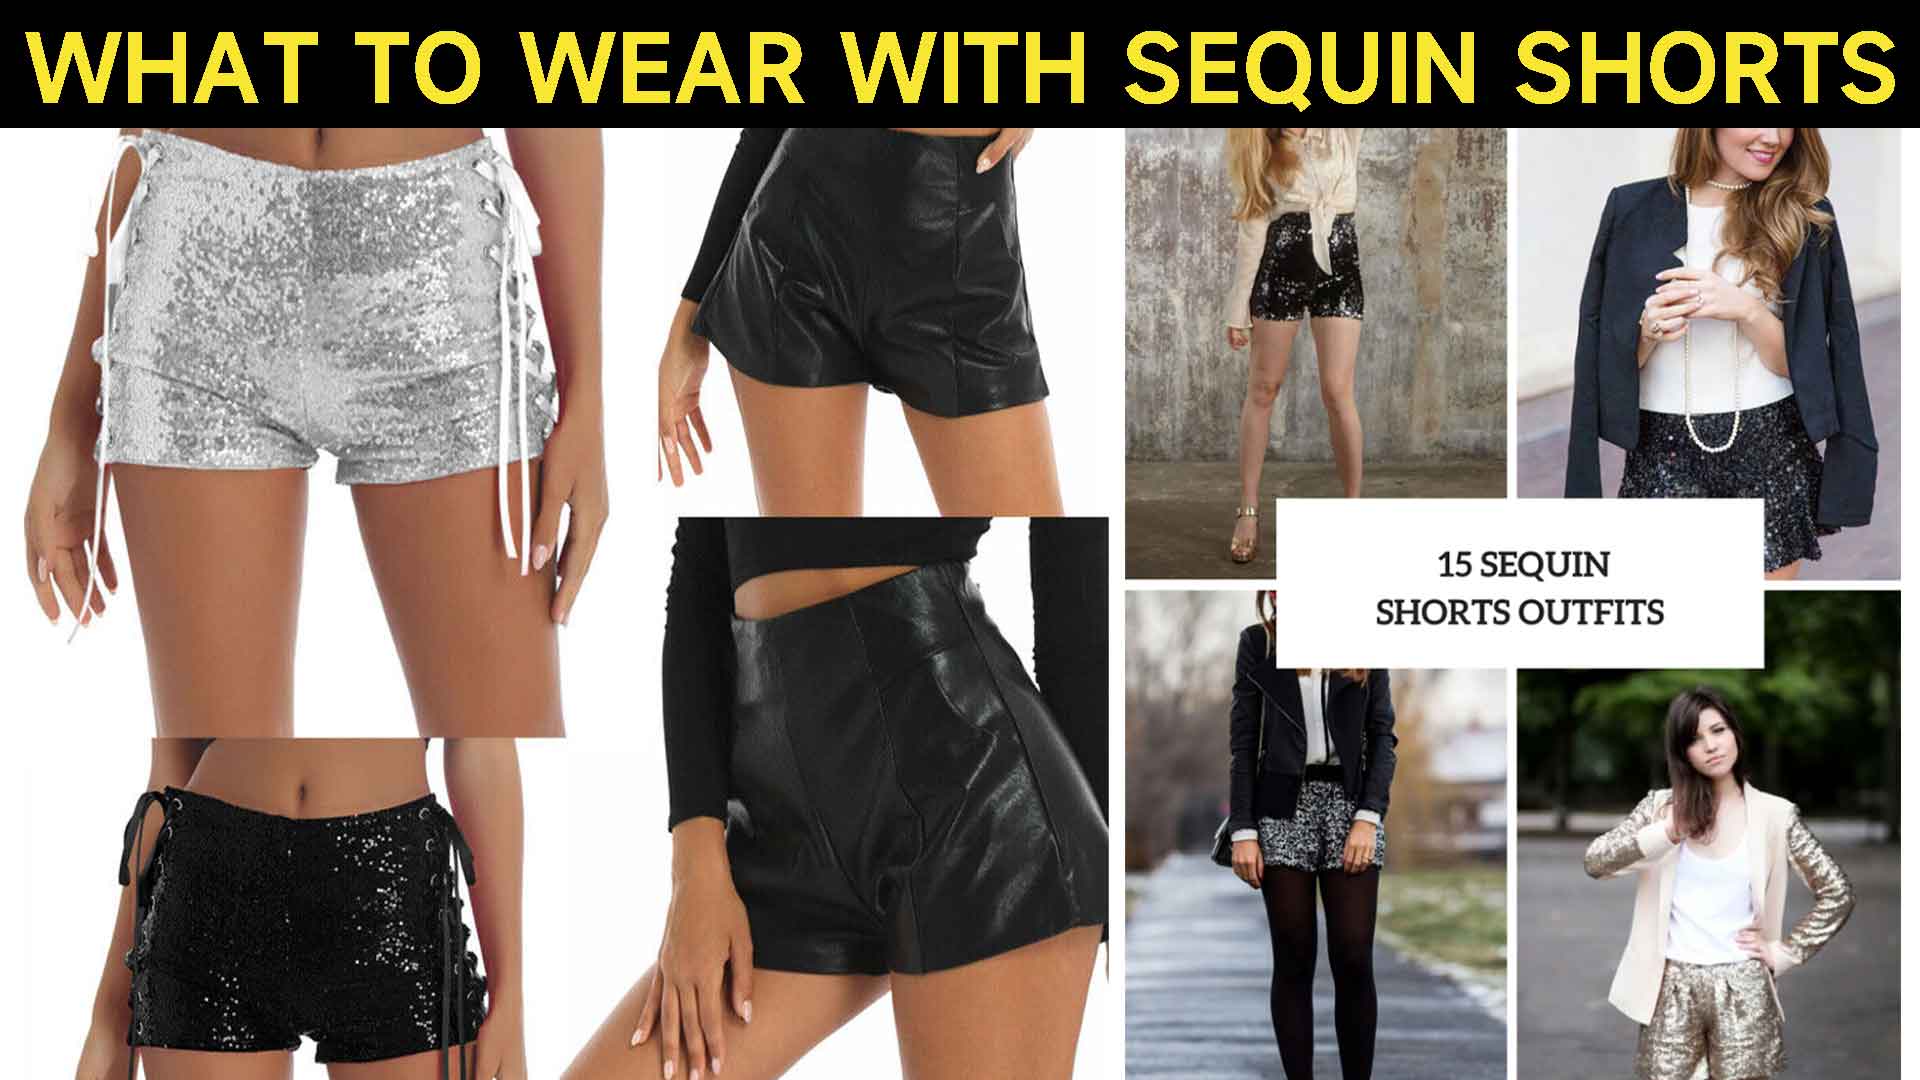 What to Wear With Sequin Shorts